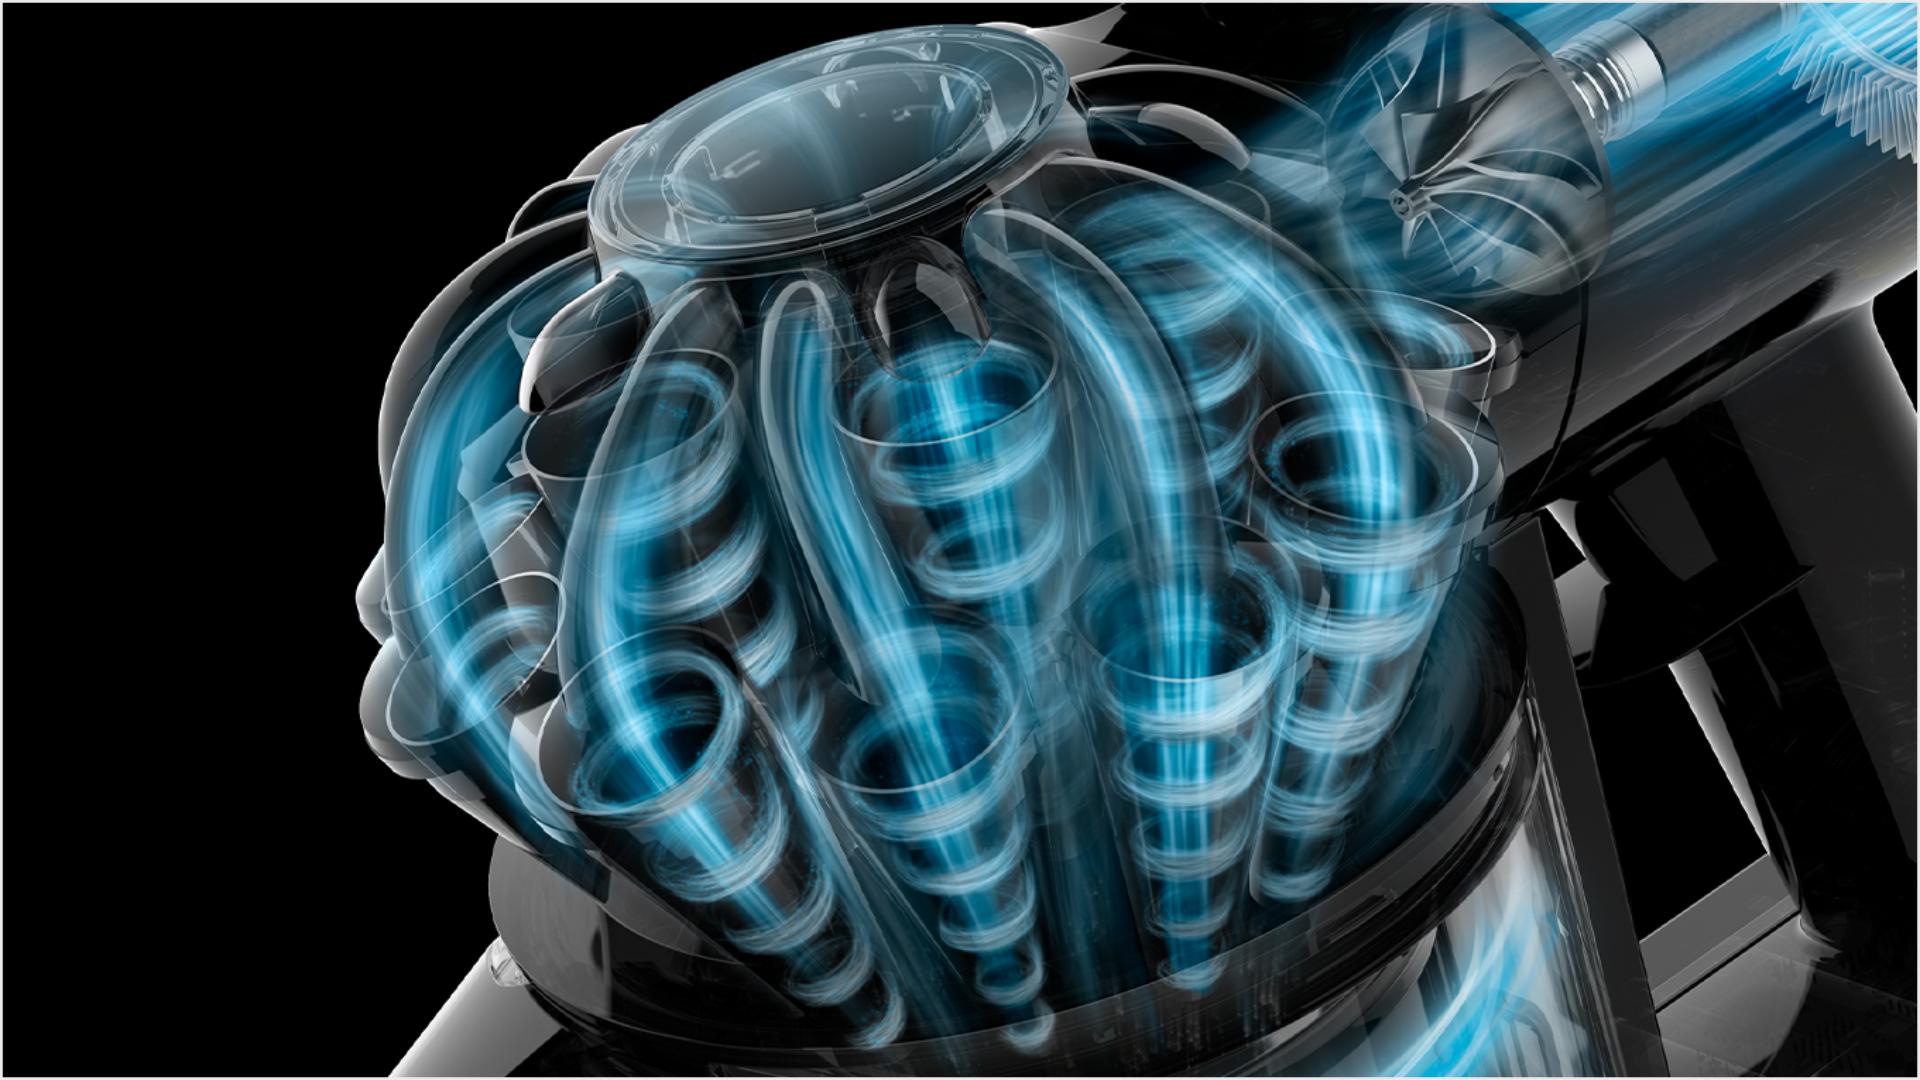 A cutaway of the side of a Dyson V8 Focus, with a blue illustration representing airflow the generated forces inside the machine.